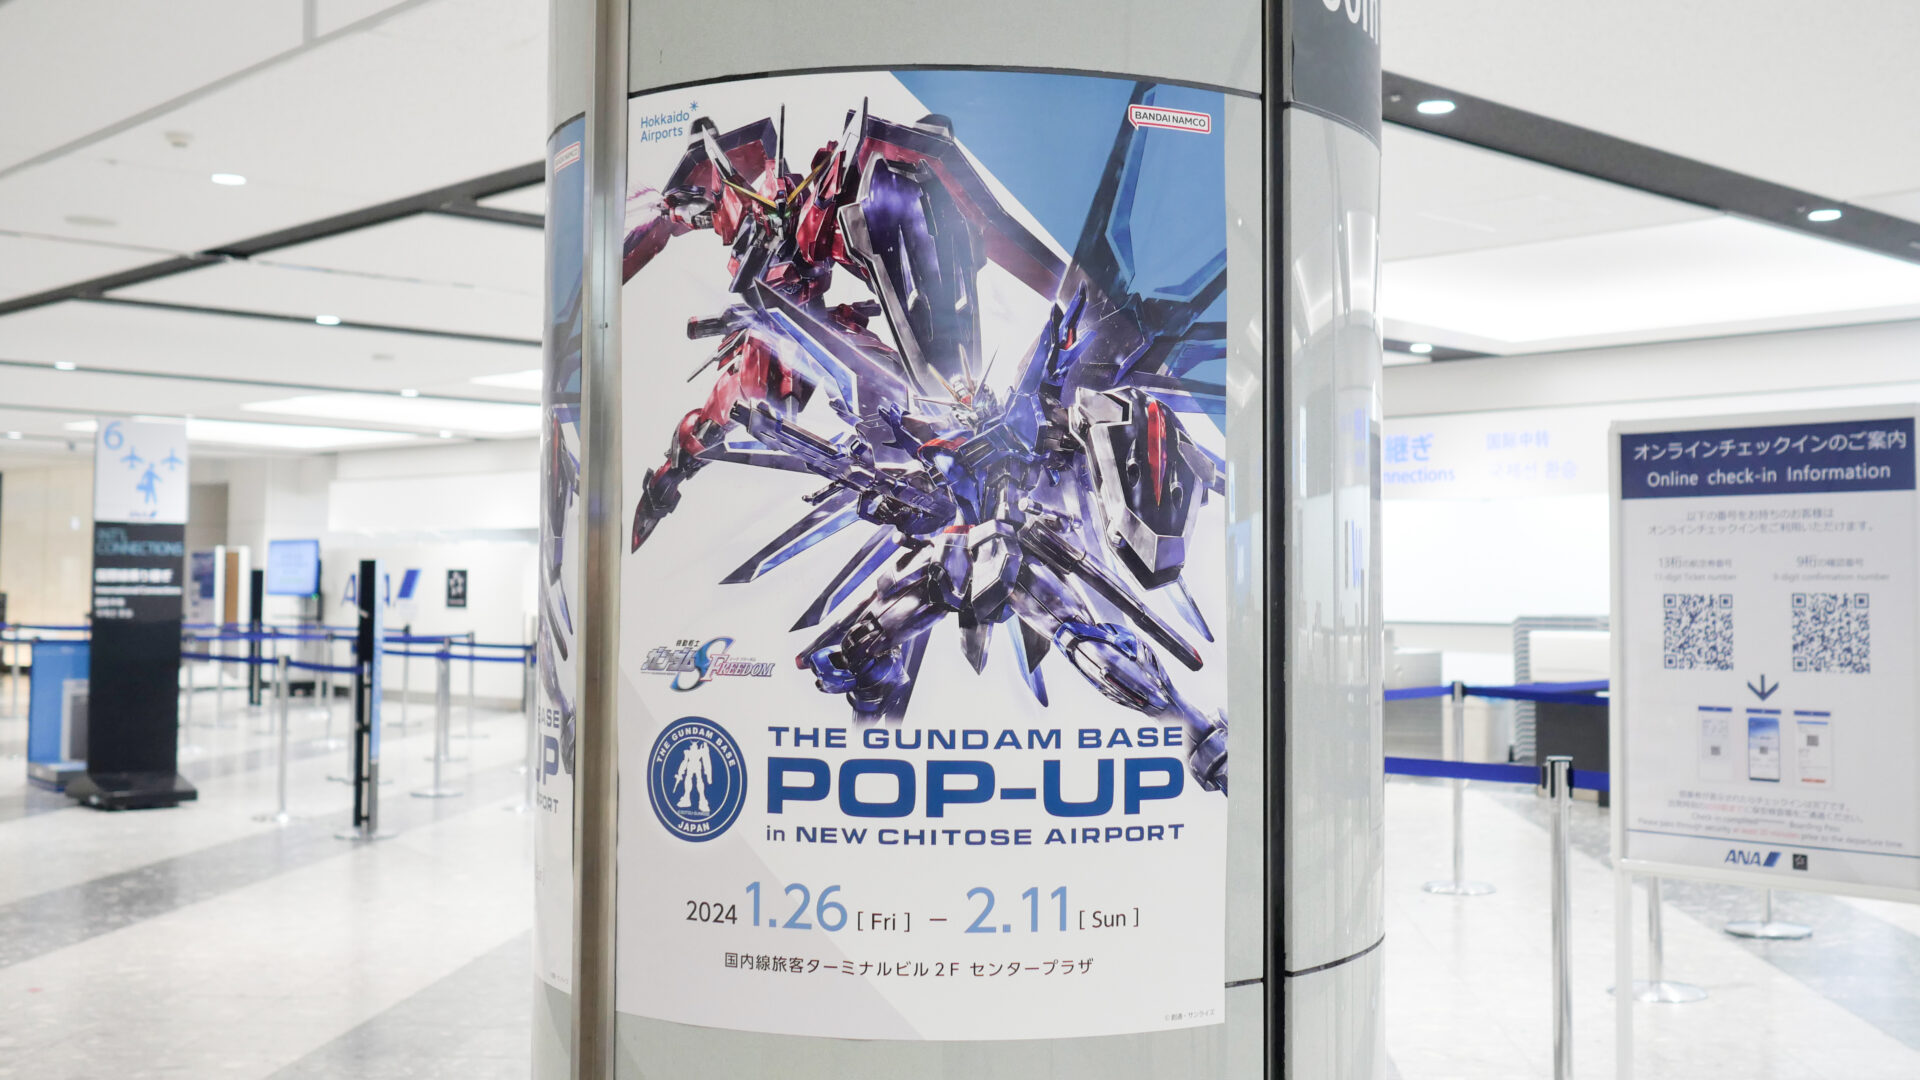 「THE GUNDAM BASE POP-UP in NEW CHITOSE AIRPORT」が新千歳空港で初開催！